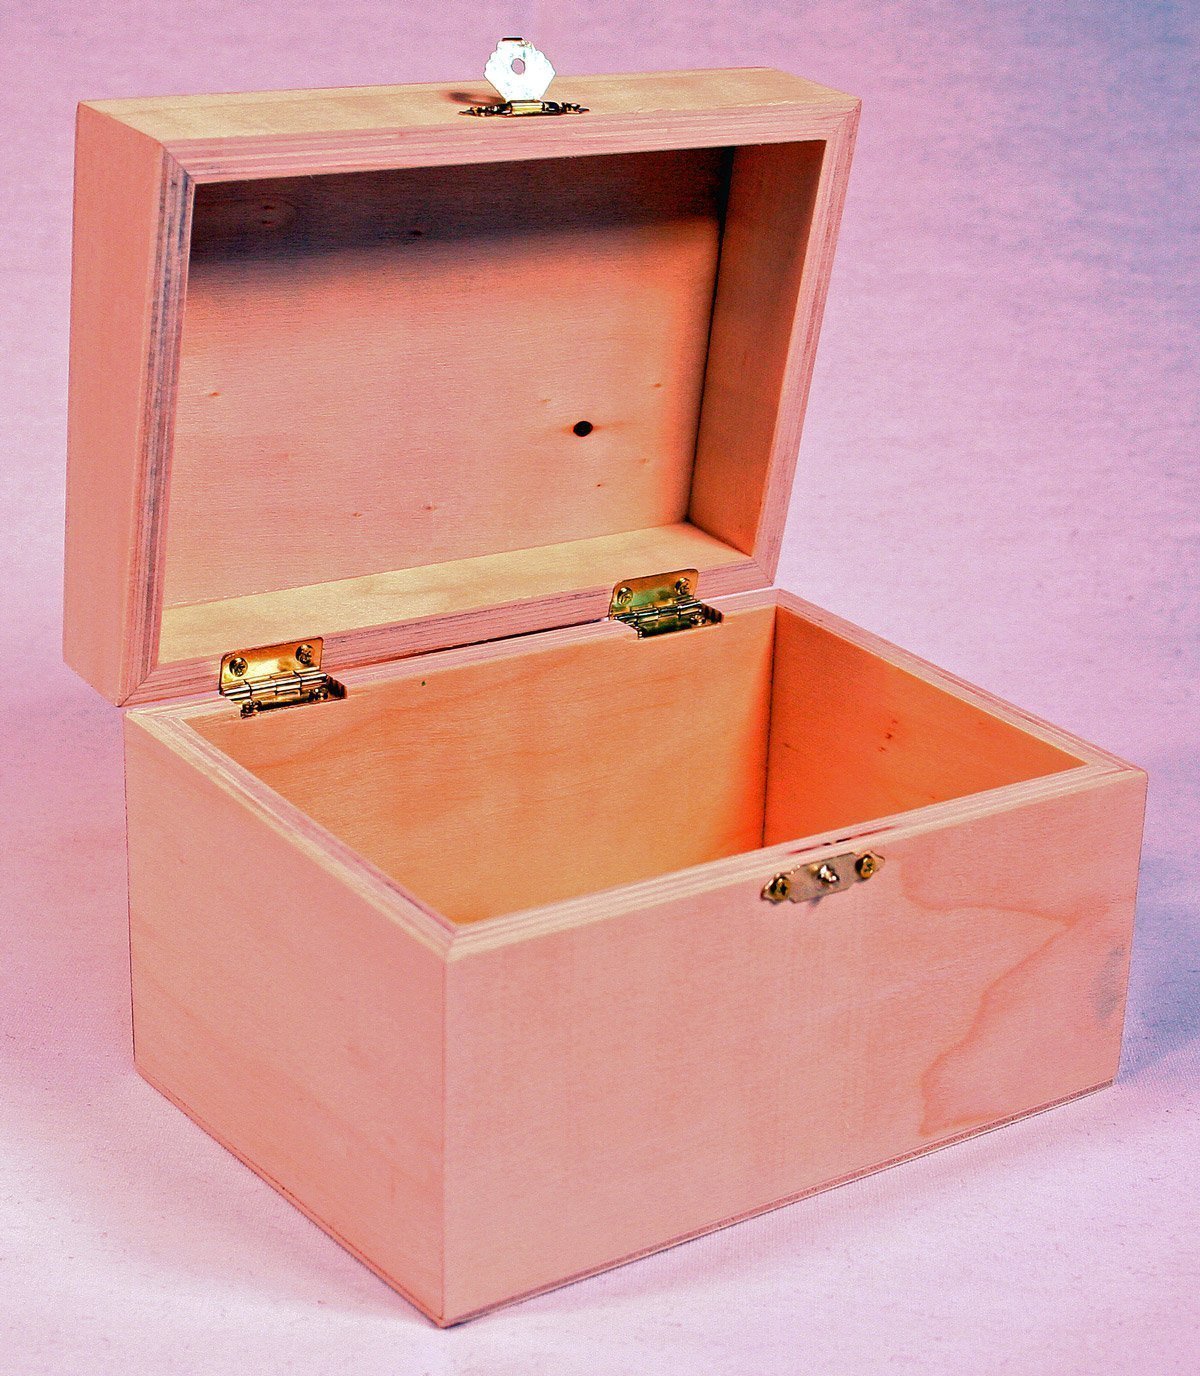 Wooden Recipe Box with Hinged Lid and Front Clasp - 6.75" x 4.5" x 4.25"